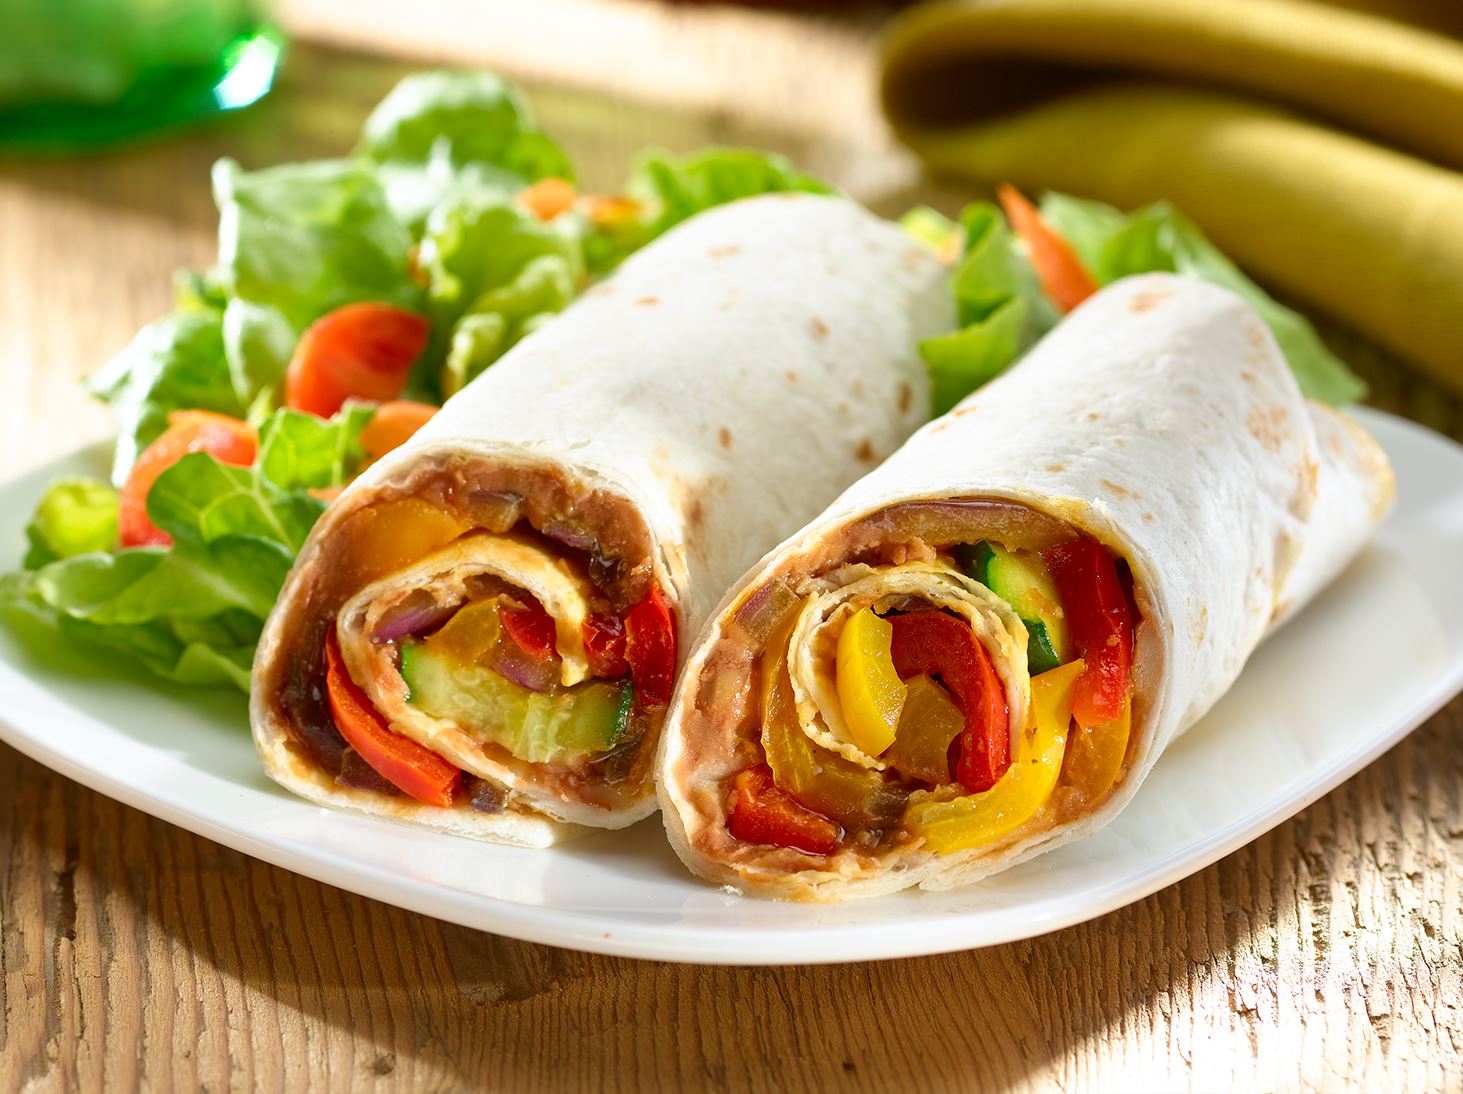 Grilled Vegetable Wrap with Peppers, Zucchini and Beans